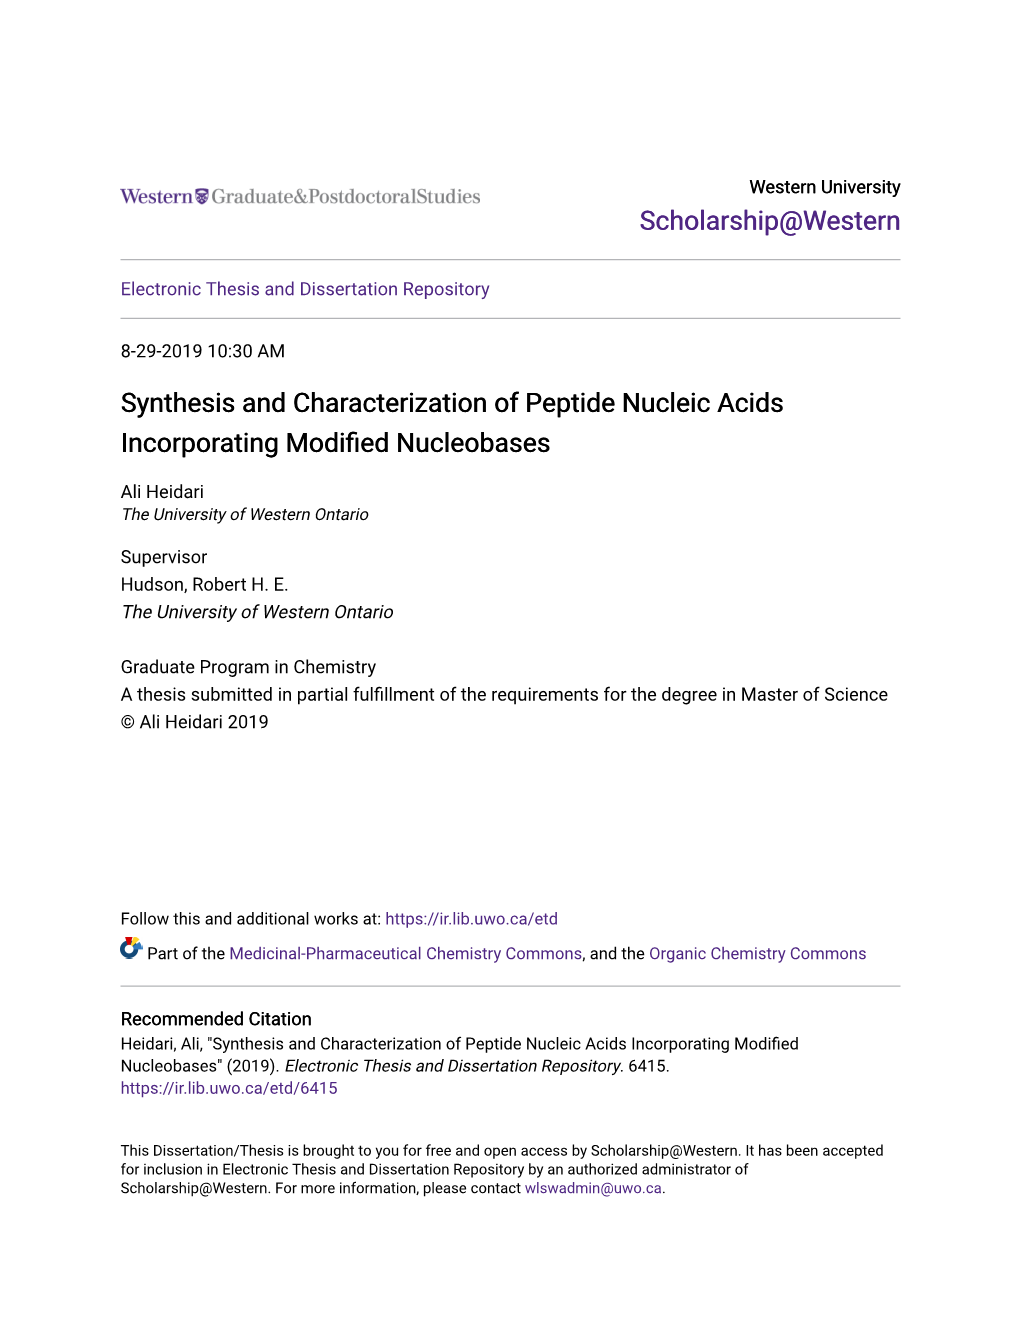 Synthesis and Characterization of Peptide Nucleic Acids Incorporating Modified Nucleobases